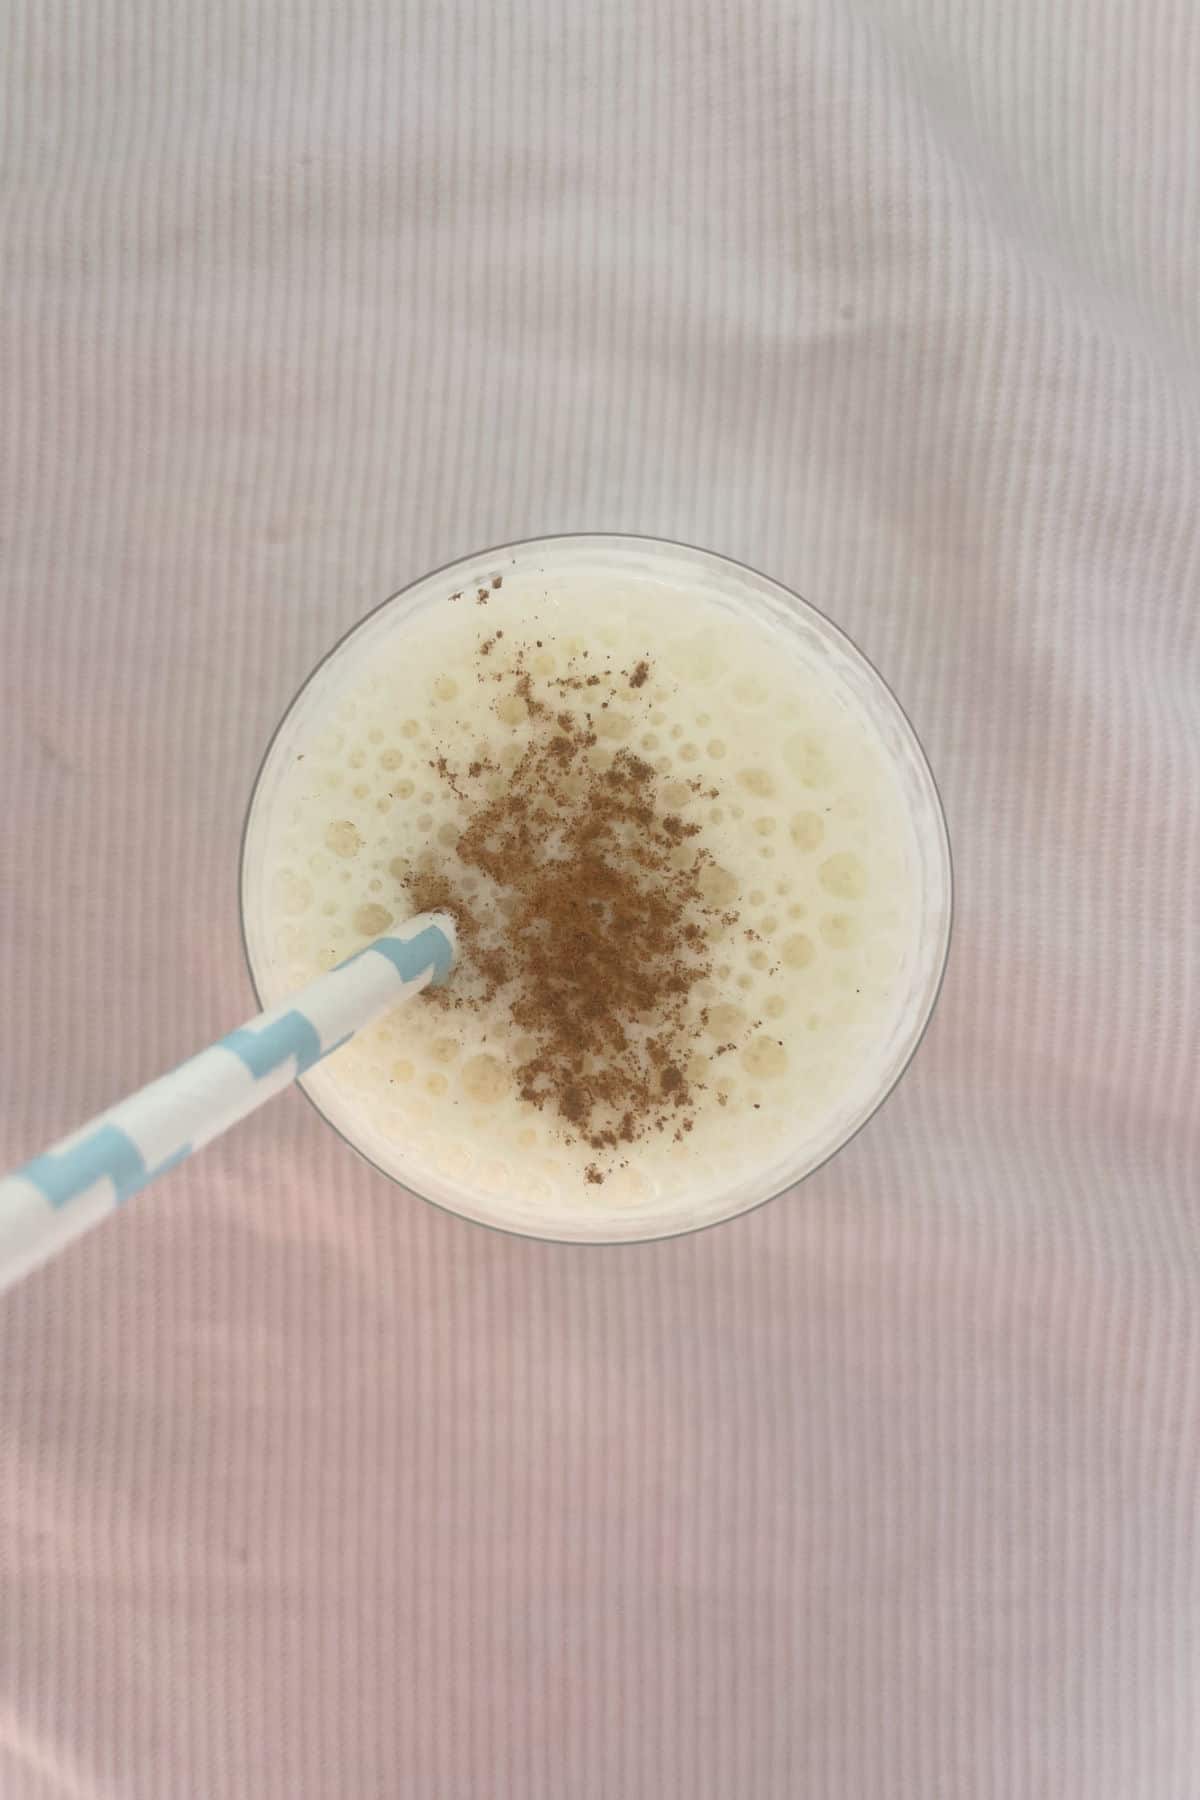 Overhead view of a banana smoothie sprinkled with cinnamon sitting on a pink towel.